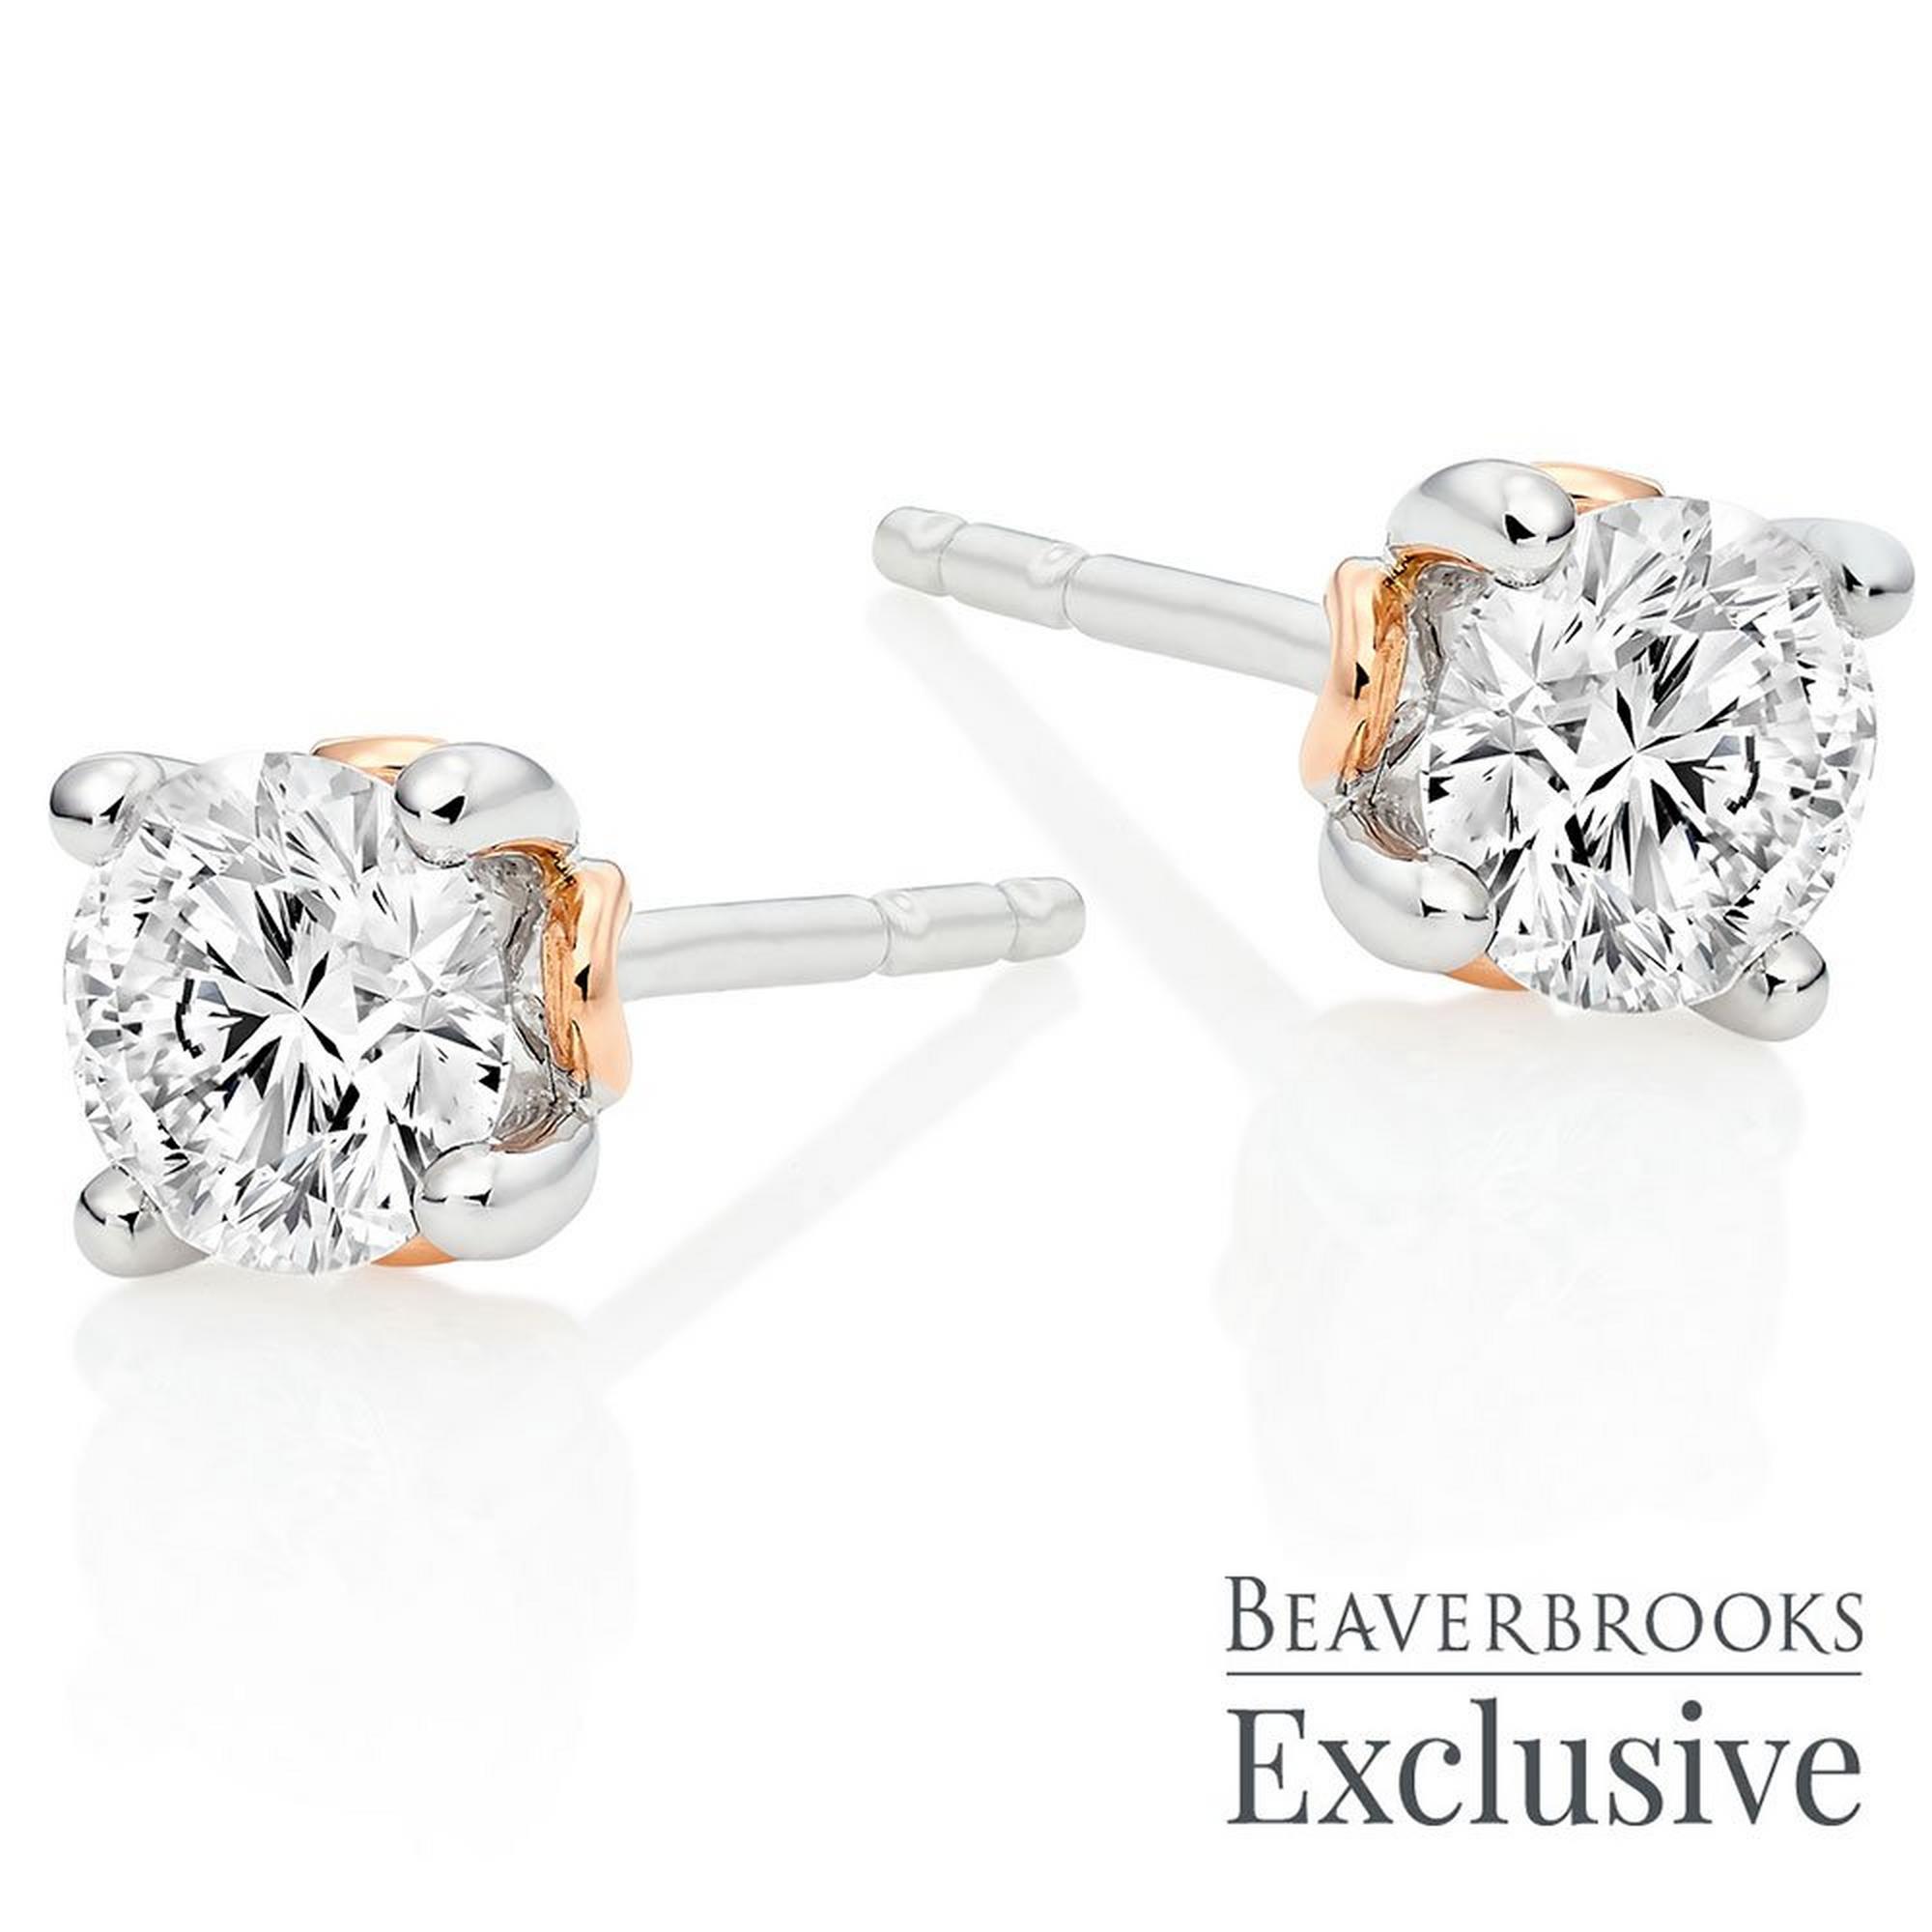 Beyond Brilliance 18ct White Gold and Rose Gold Diamond Earrings